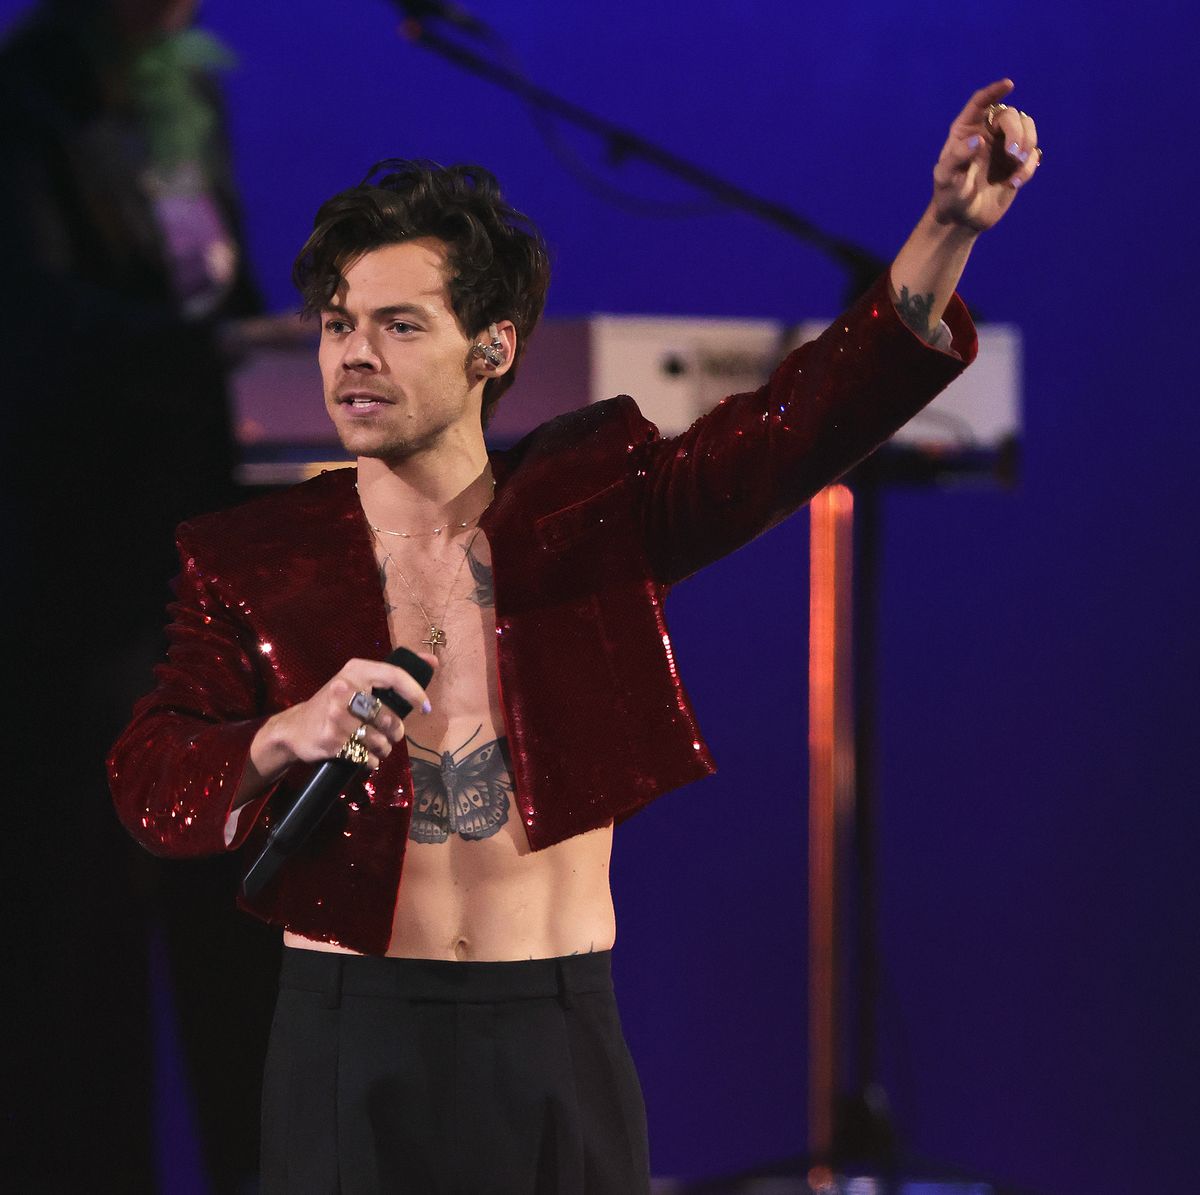 https://hips.hearstapps.com/hmg-prod/images/harry-styles-performs-at-the-brit-awards-2023-at-the-o2-news-photo-1684170415.jpg?crop=0.670xw:1.00xh;0.119xw,0&resize=1200:*